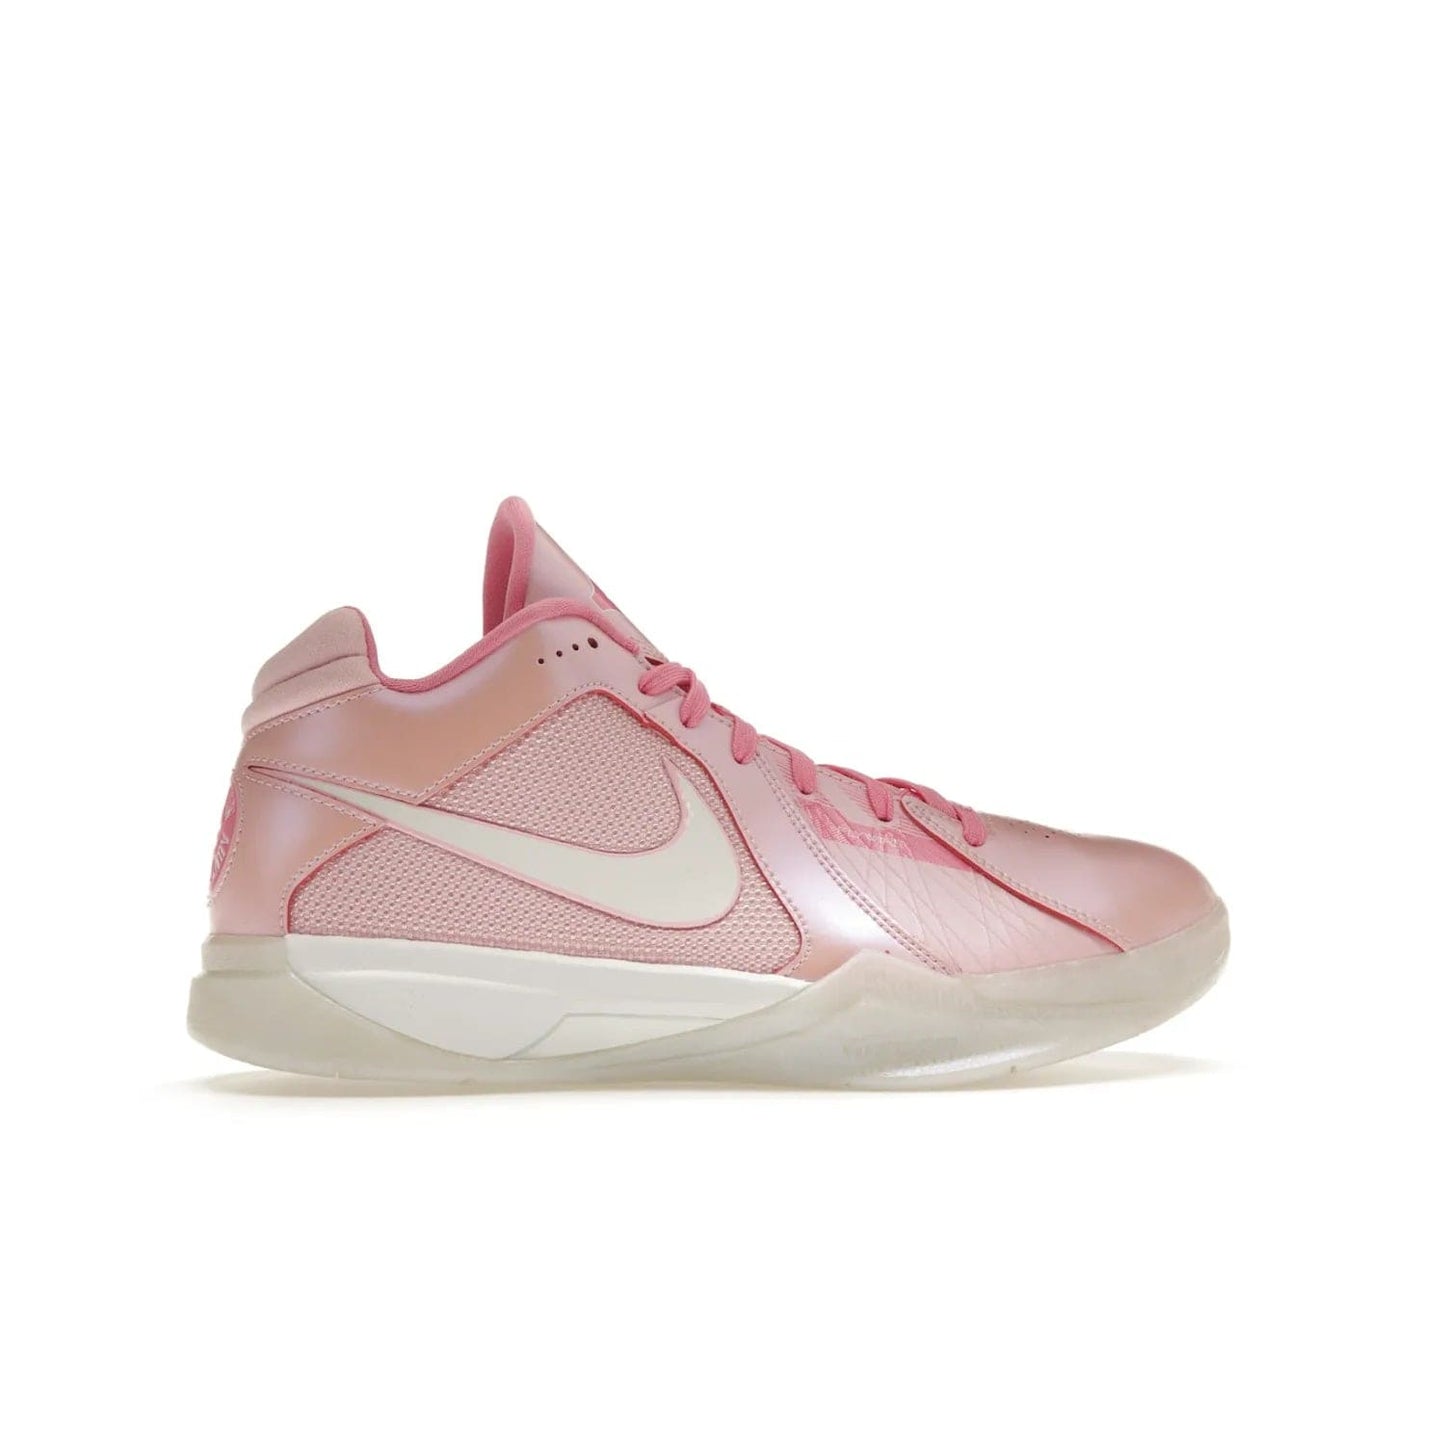 Nike KD 3 Aunt Pearl - Image 36 - Only at www.BallersClubKickz.com - Introducing the Nike KD 3 Aunt Pearl. Featuring a bold Medium Soft Pink, White, & Lotus Pink colorway. Get ready to stand out this October 15th.